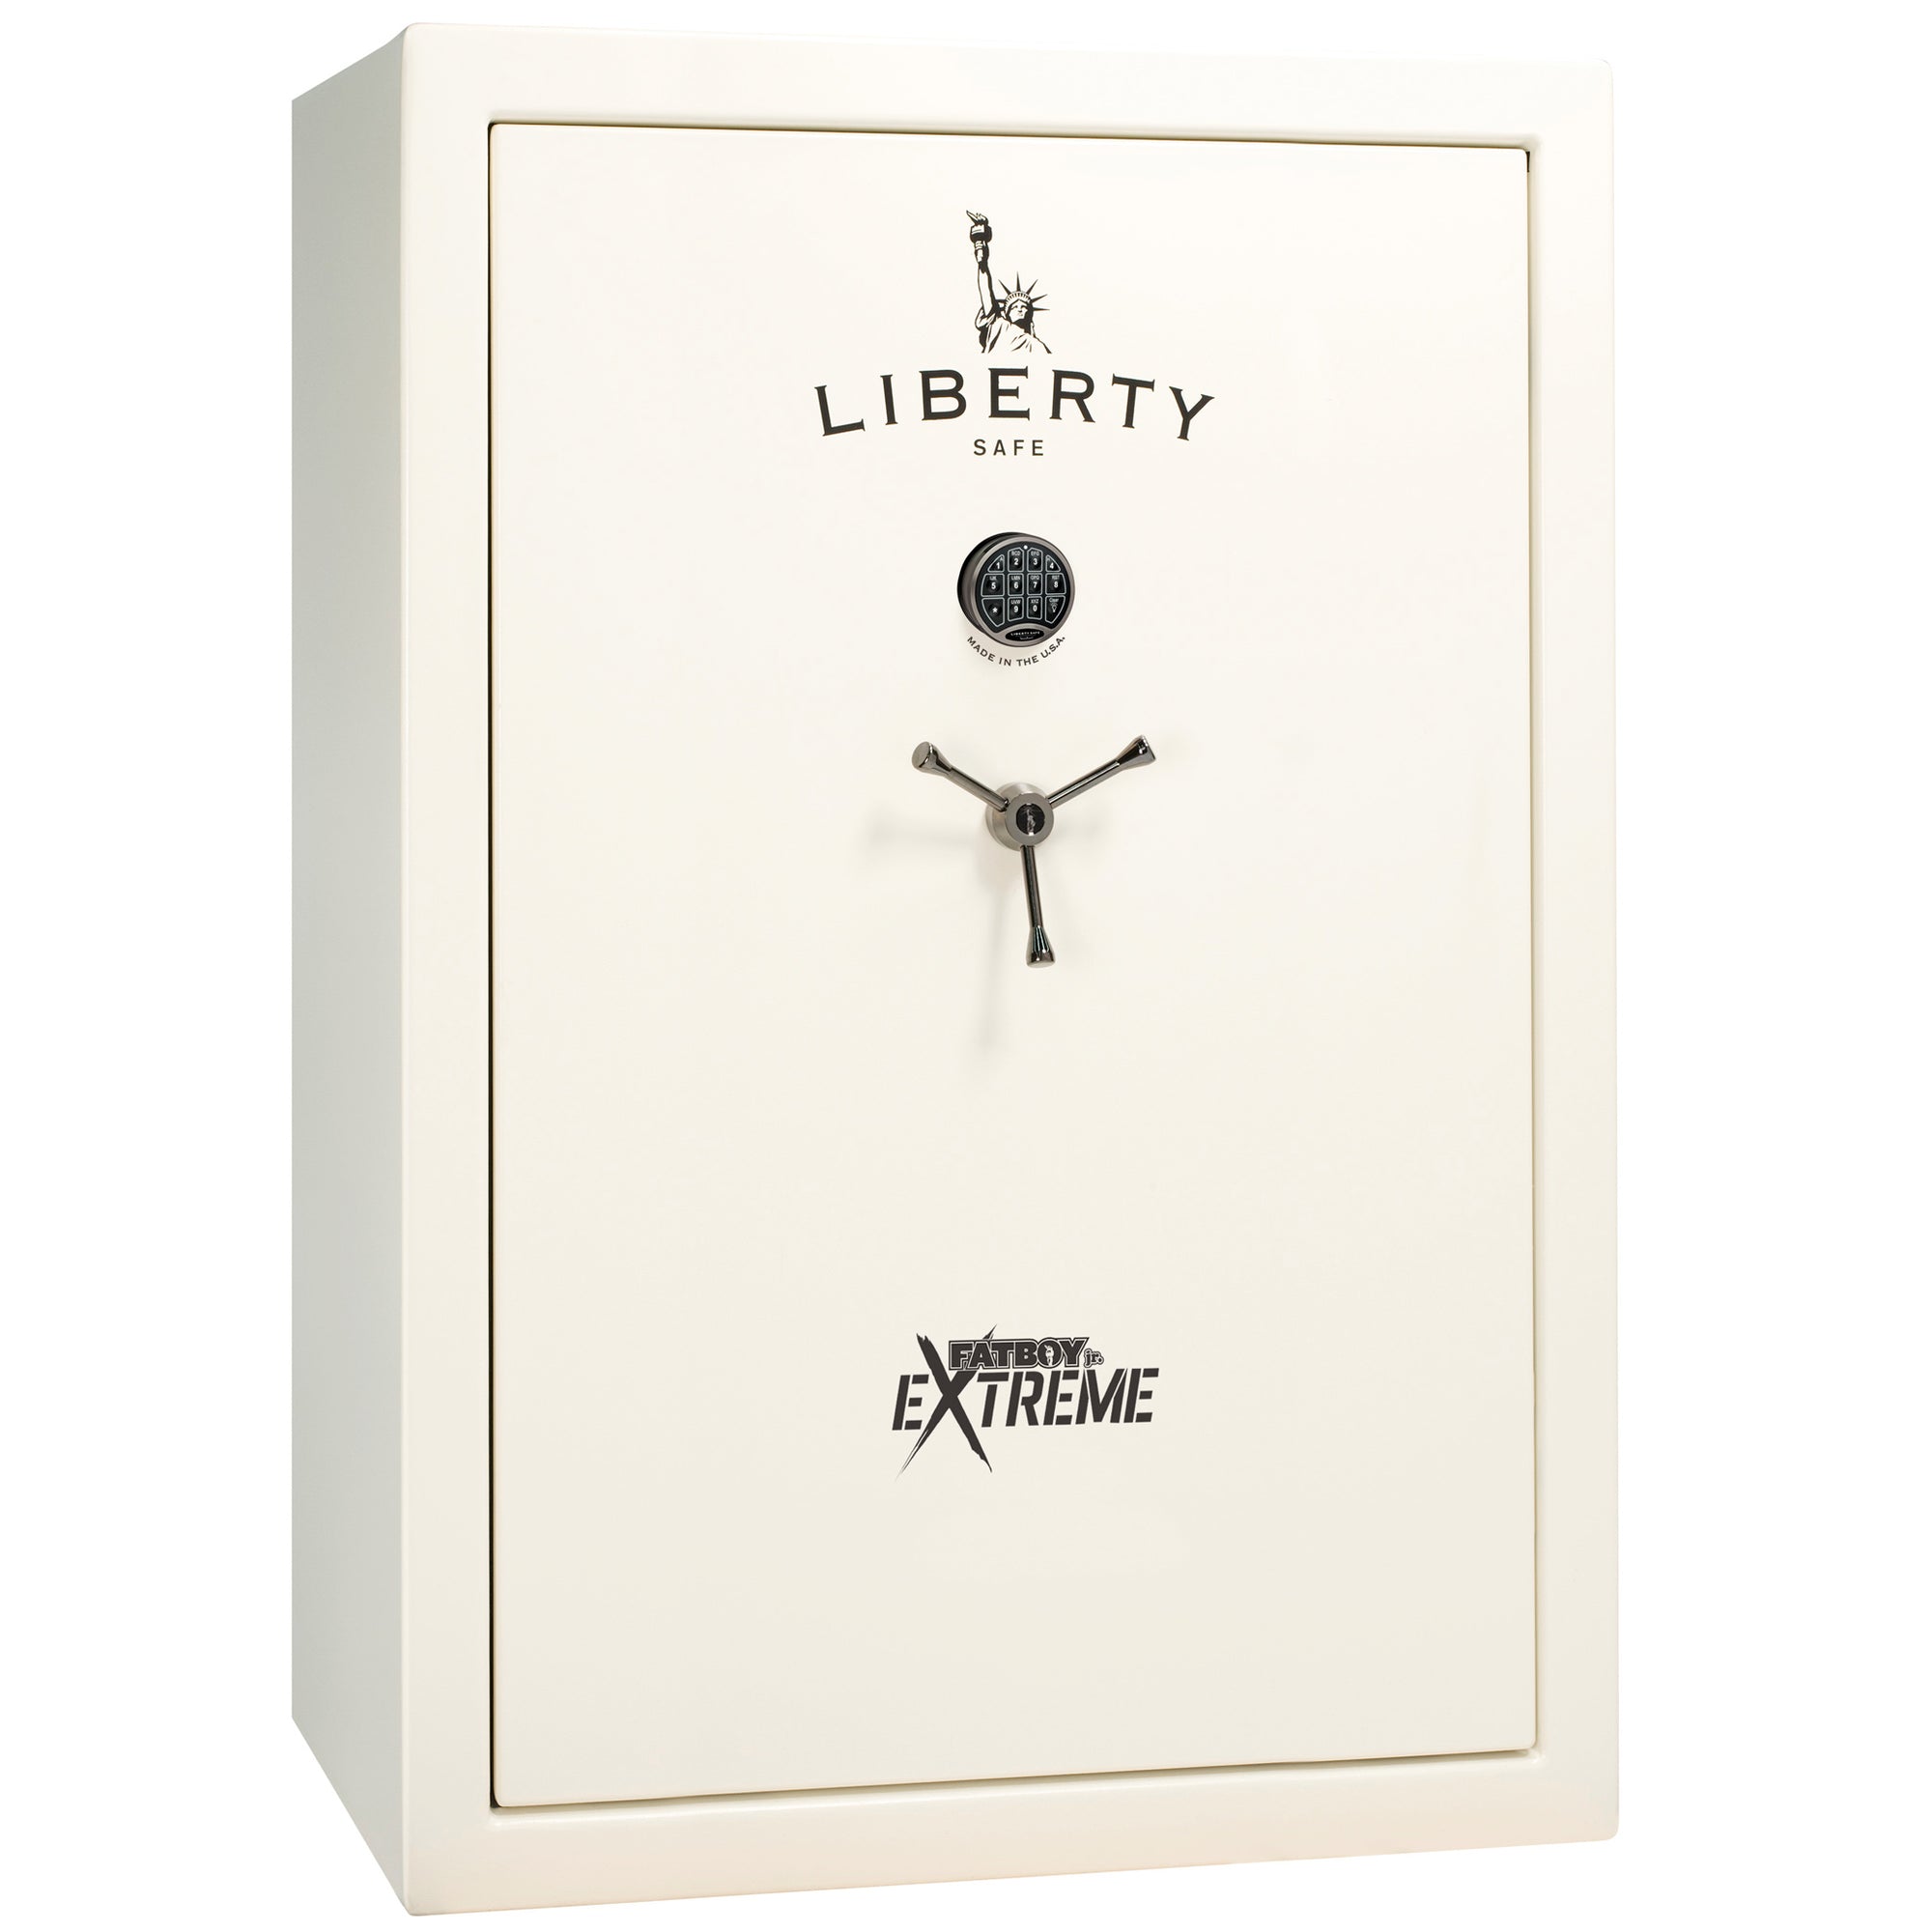 Fatboy Jr. Extreme - Textured White Elock | Level 4 Security | 75 Minute Fire Protection | Closed